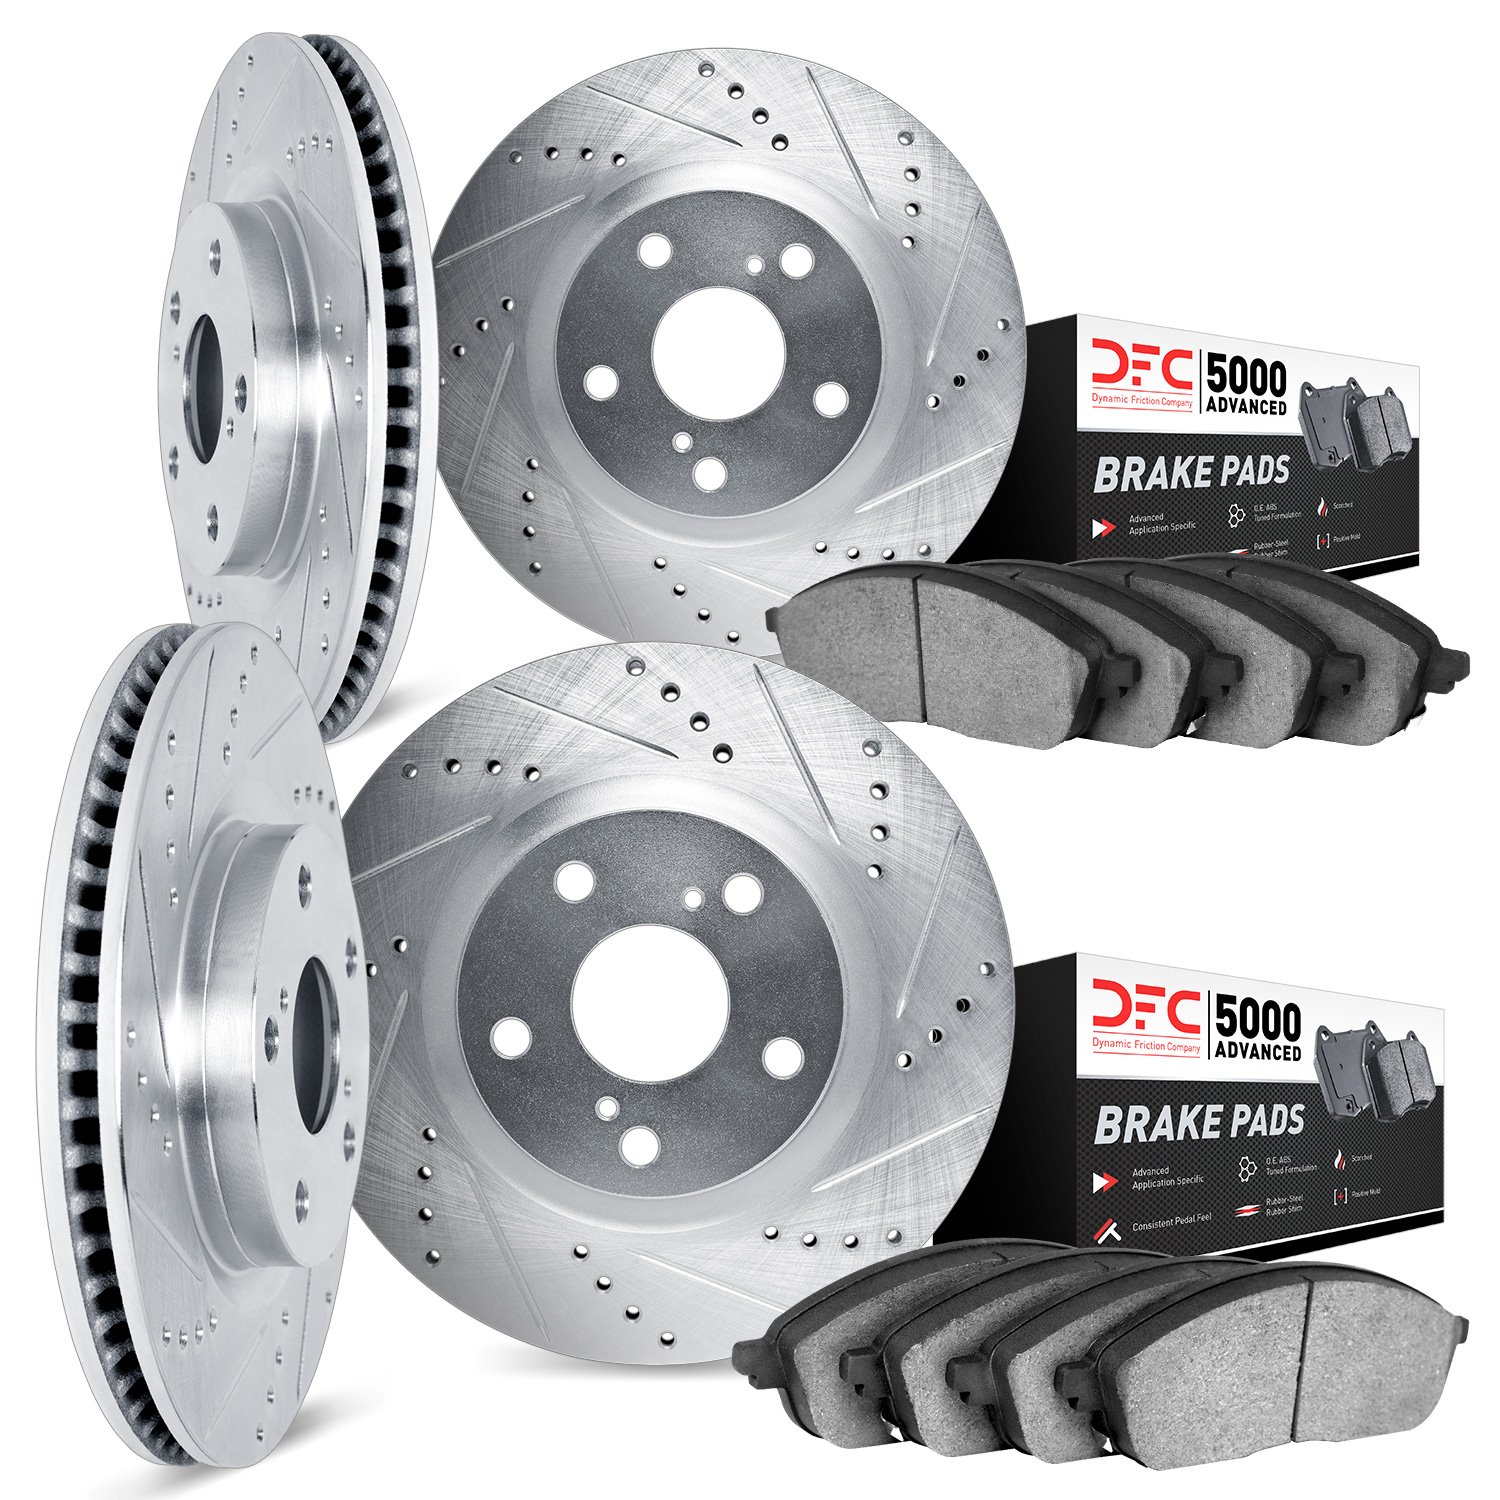 7504-31081 Drilled/Slotted Brake Rotors w/5000 Advanced Brake Pads Kit [Silver], Fits Select BMW, Position: Front and Rear